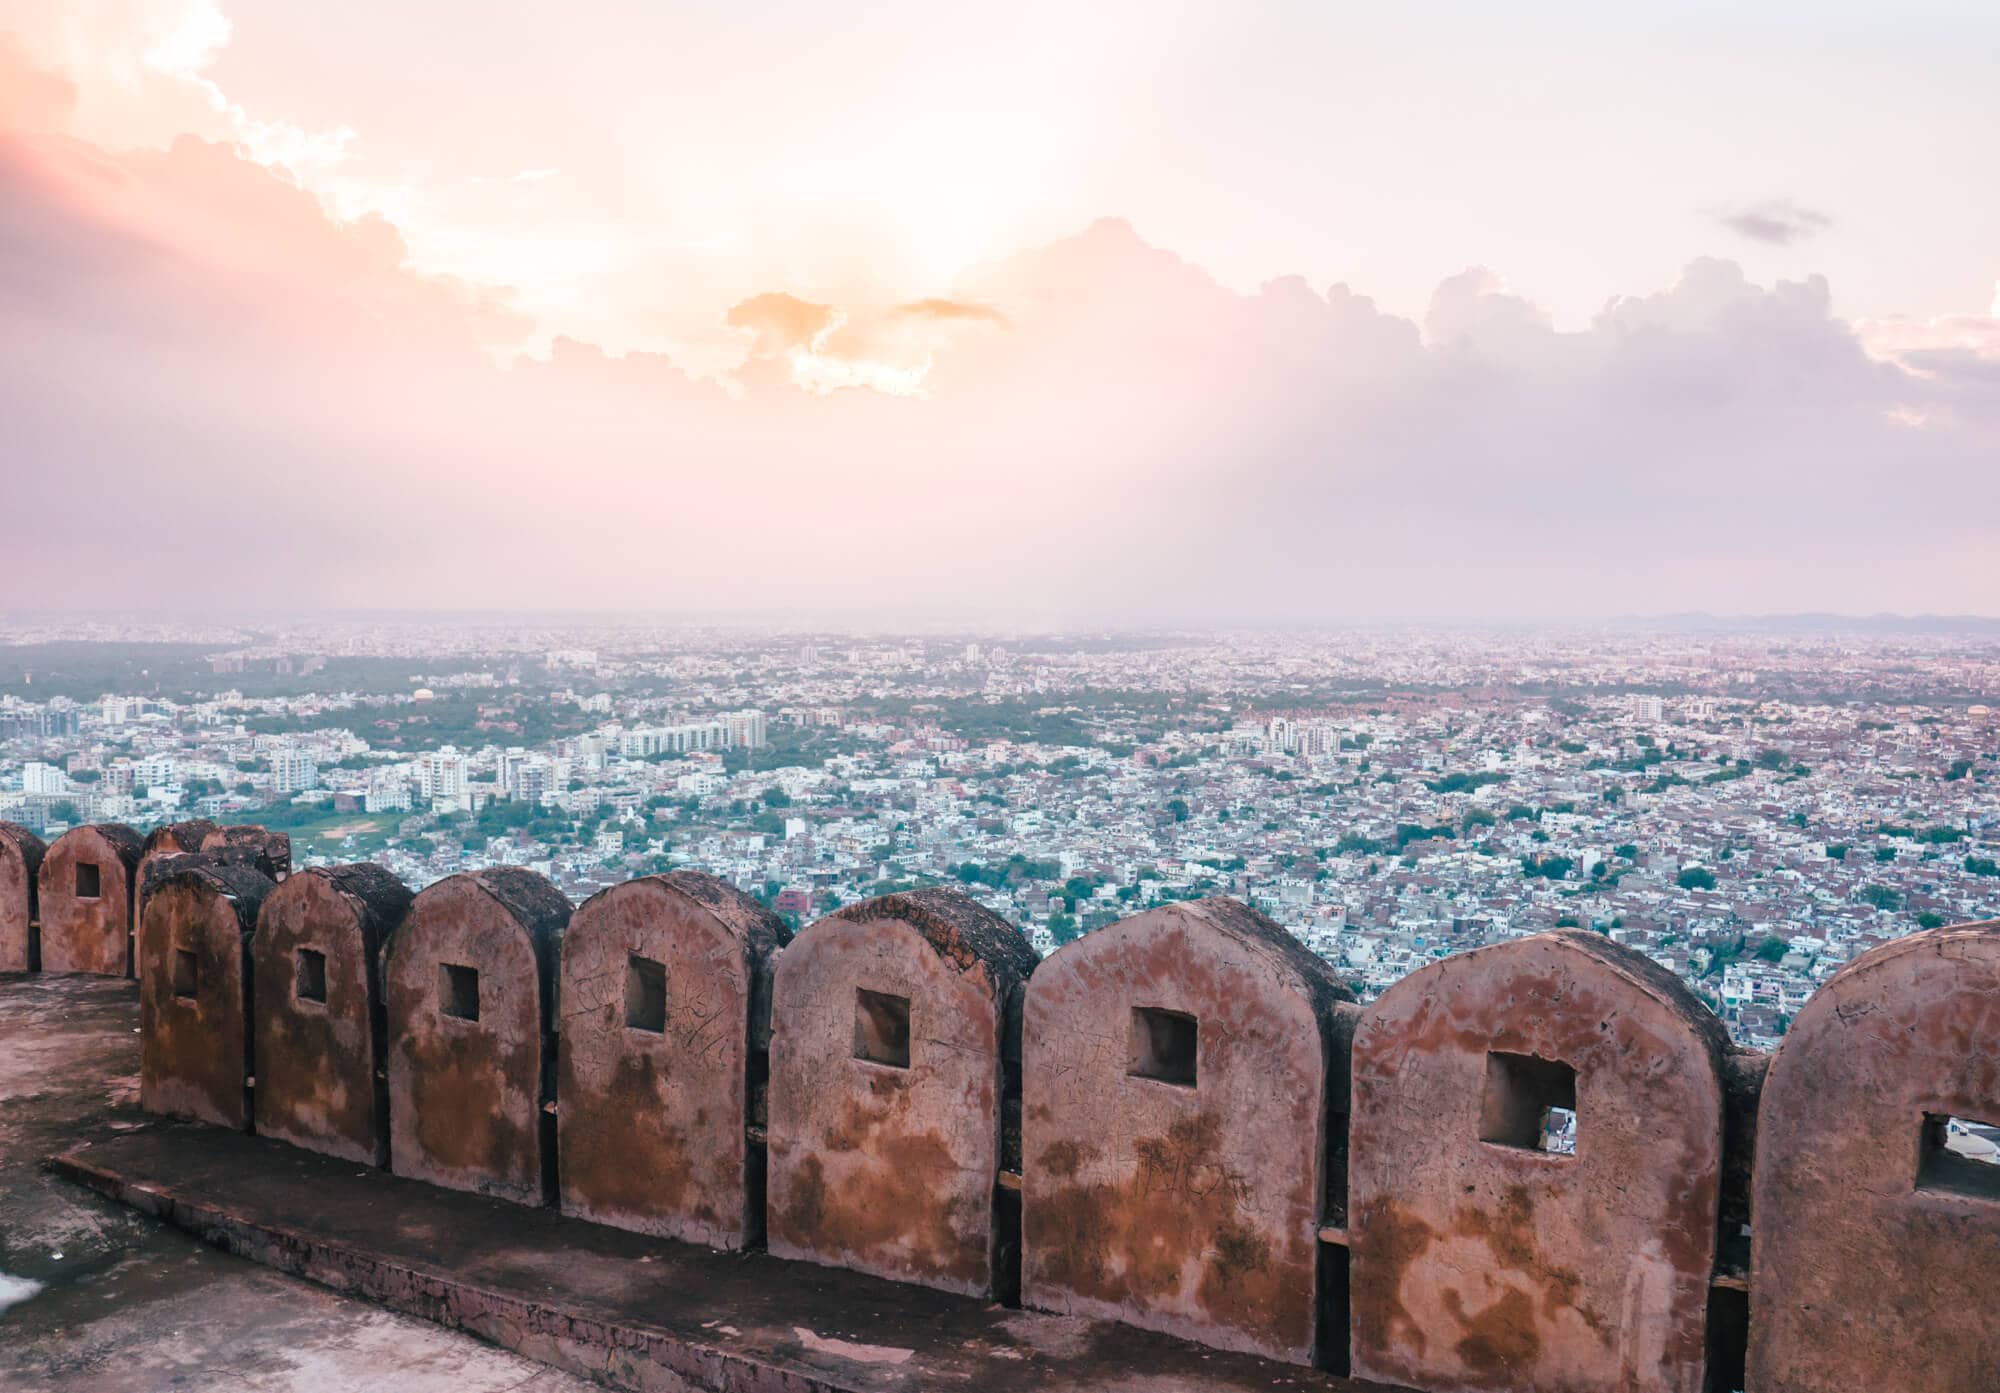 View across Jaipur from the wall of Nahargarh Fort during a pink and yellow sunset.